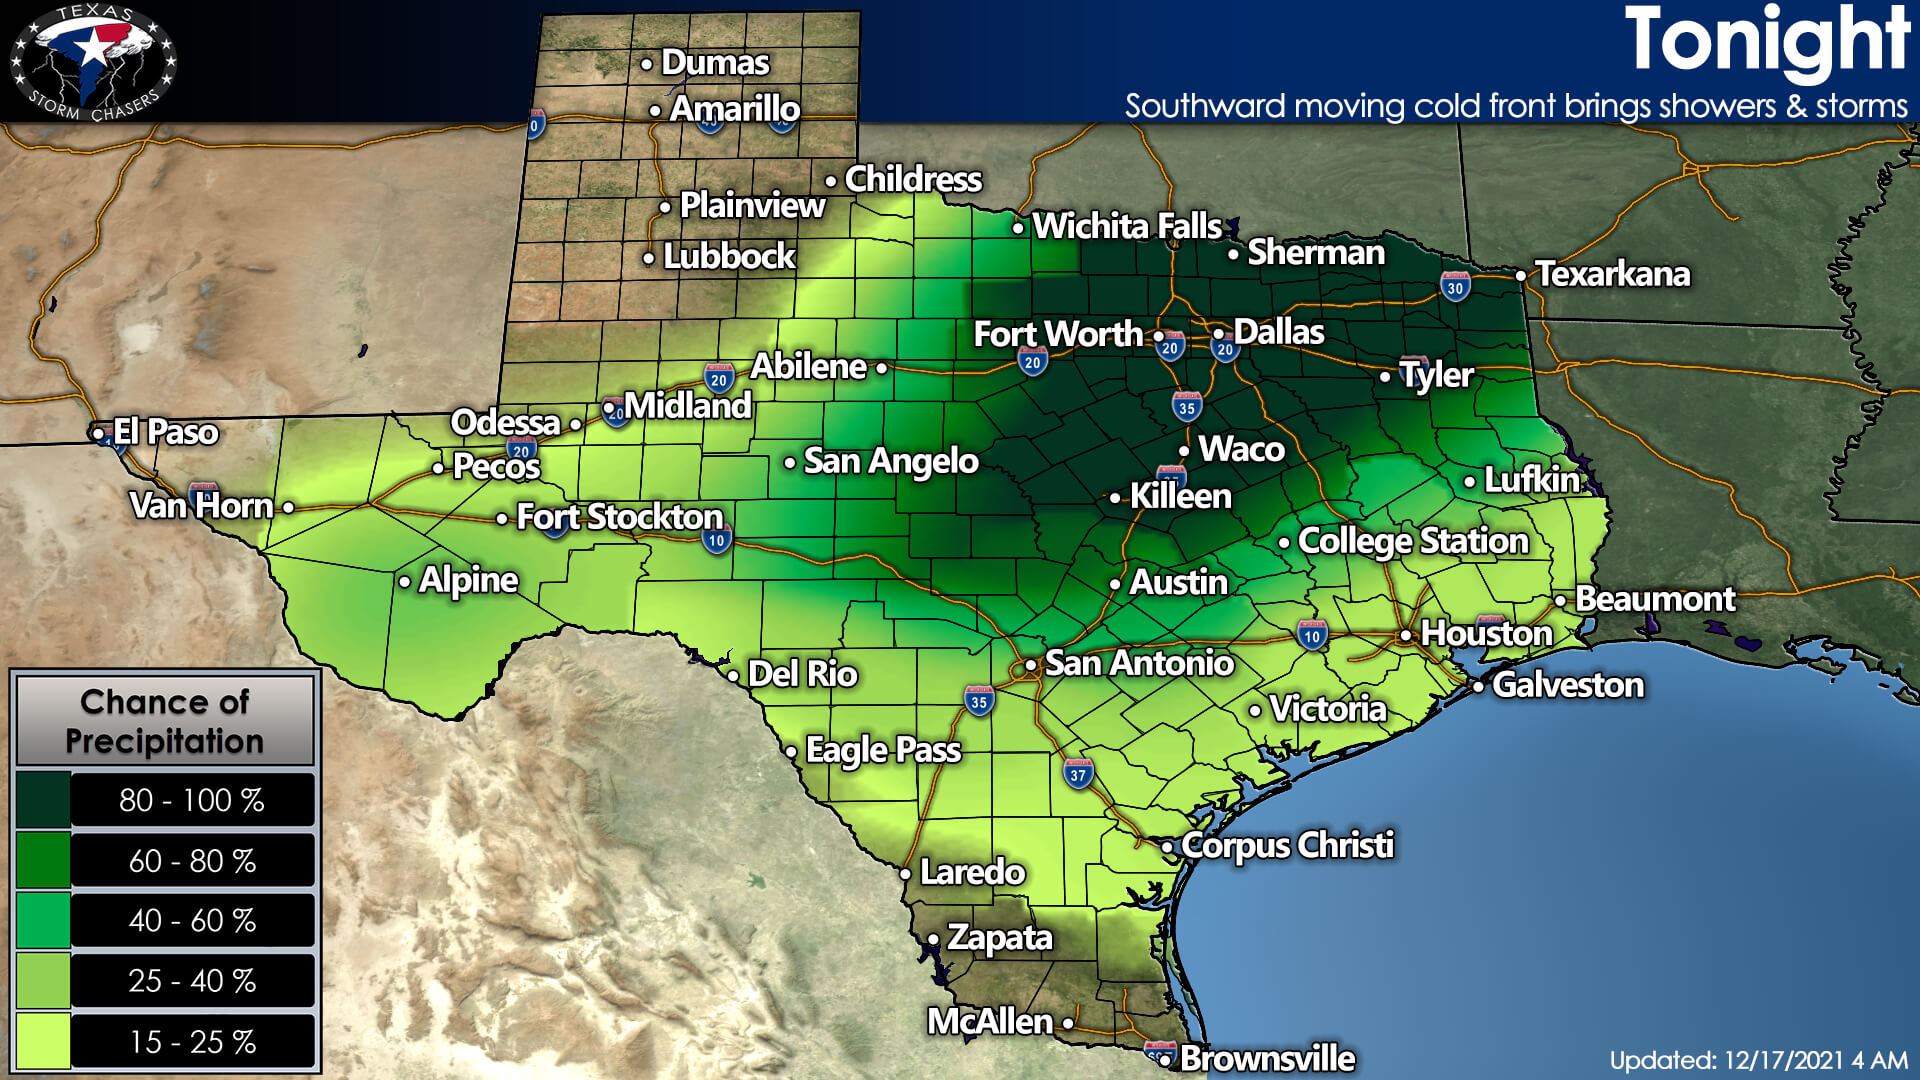 Strong cold front arrives Tonight & Saturday with Storms for Texas